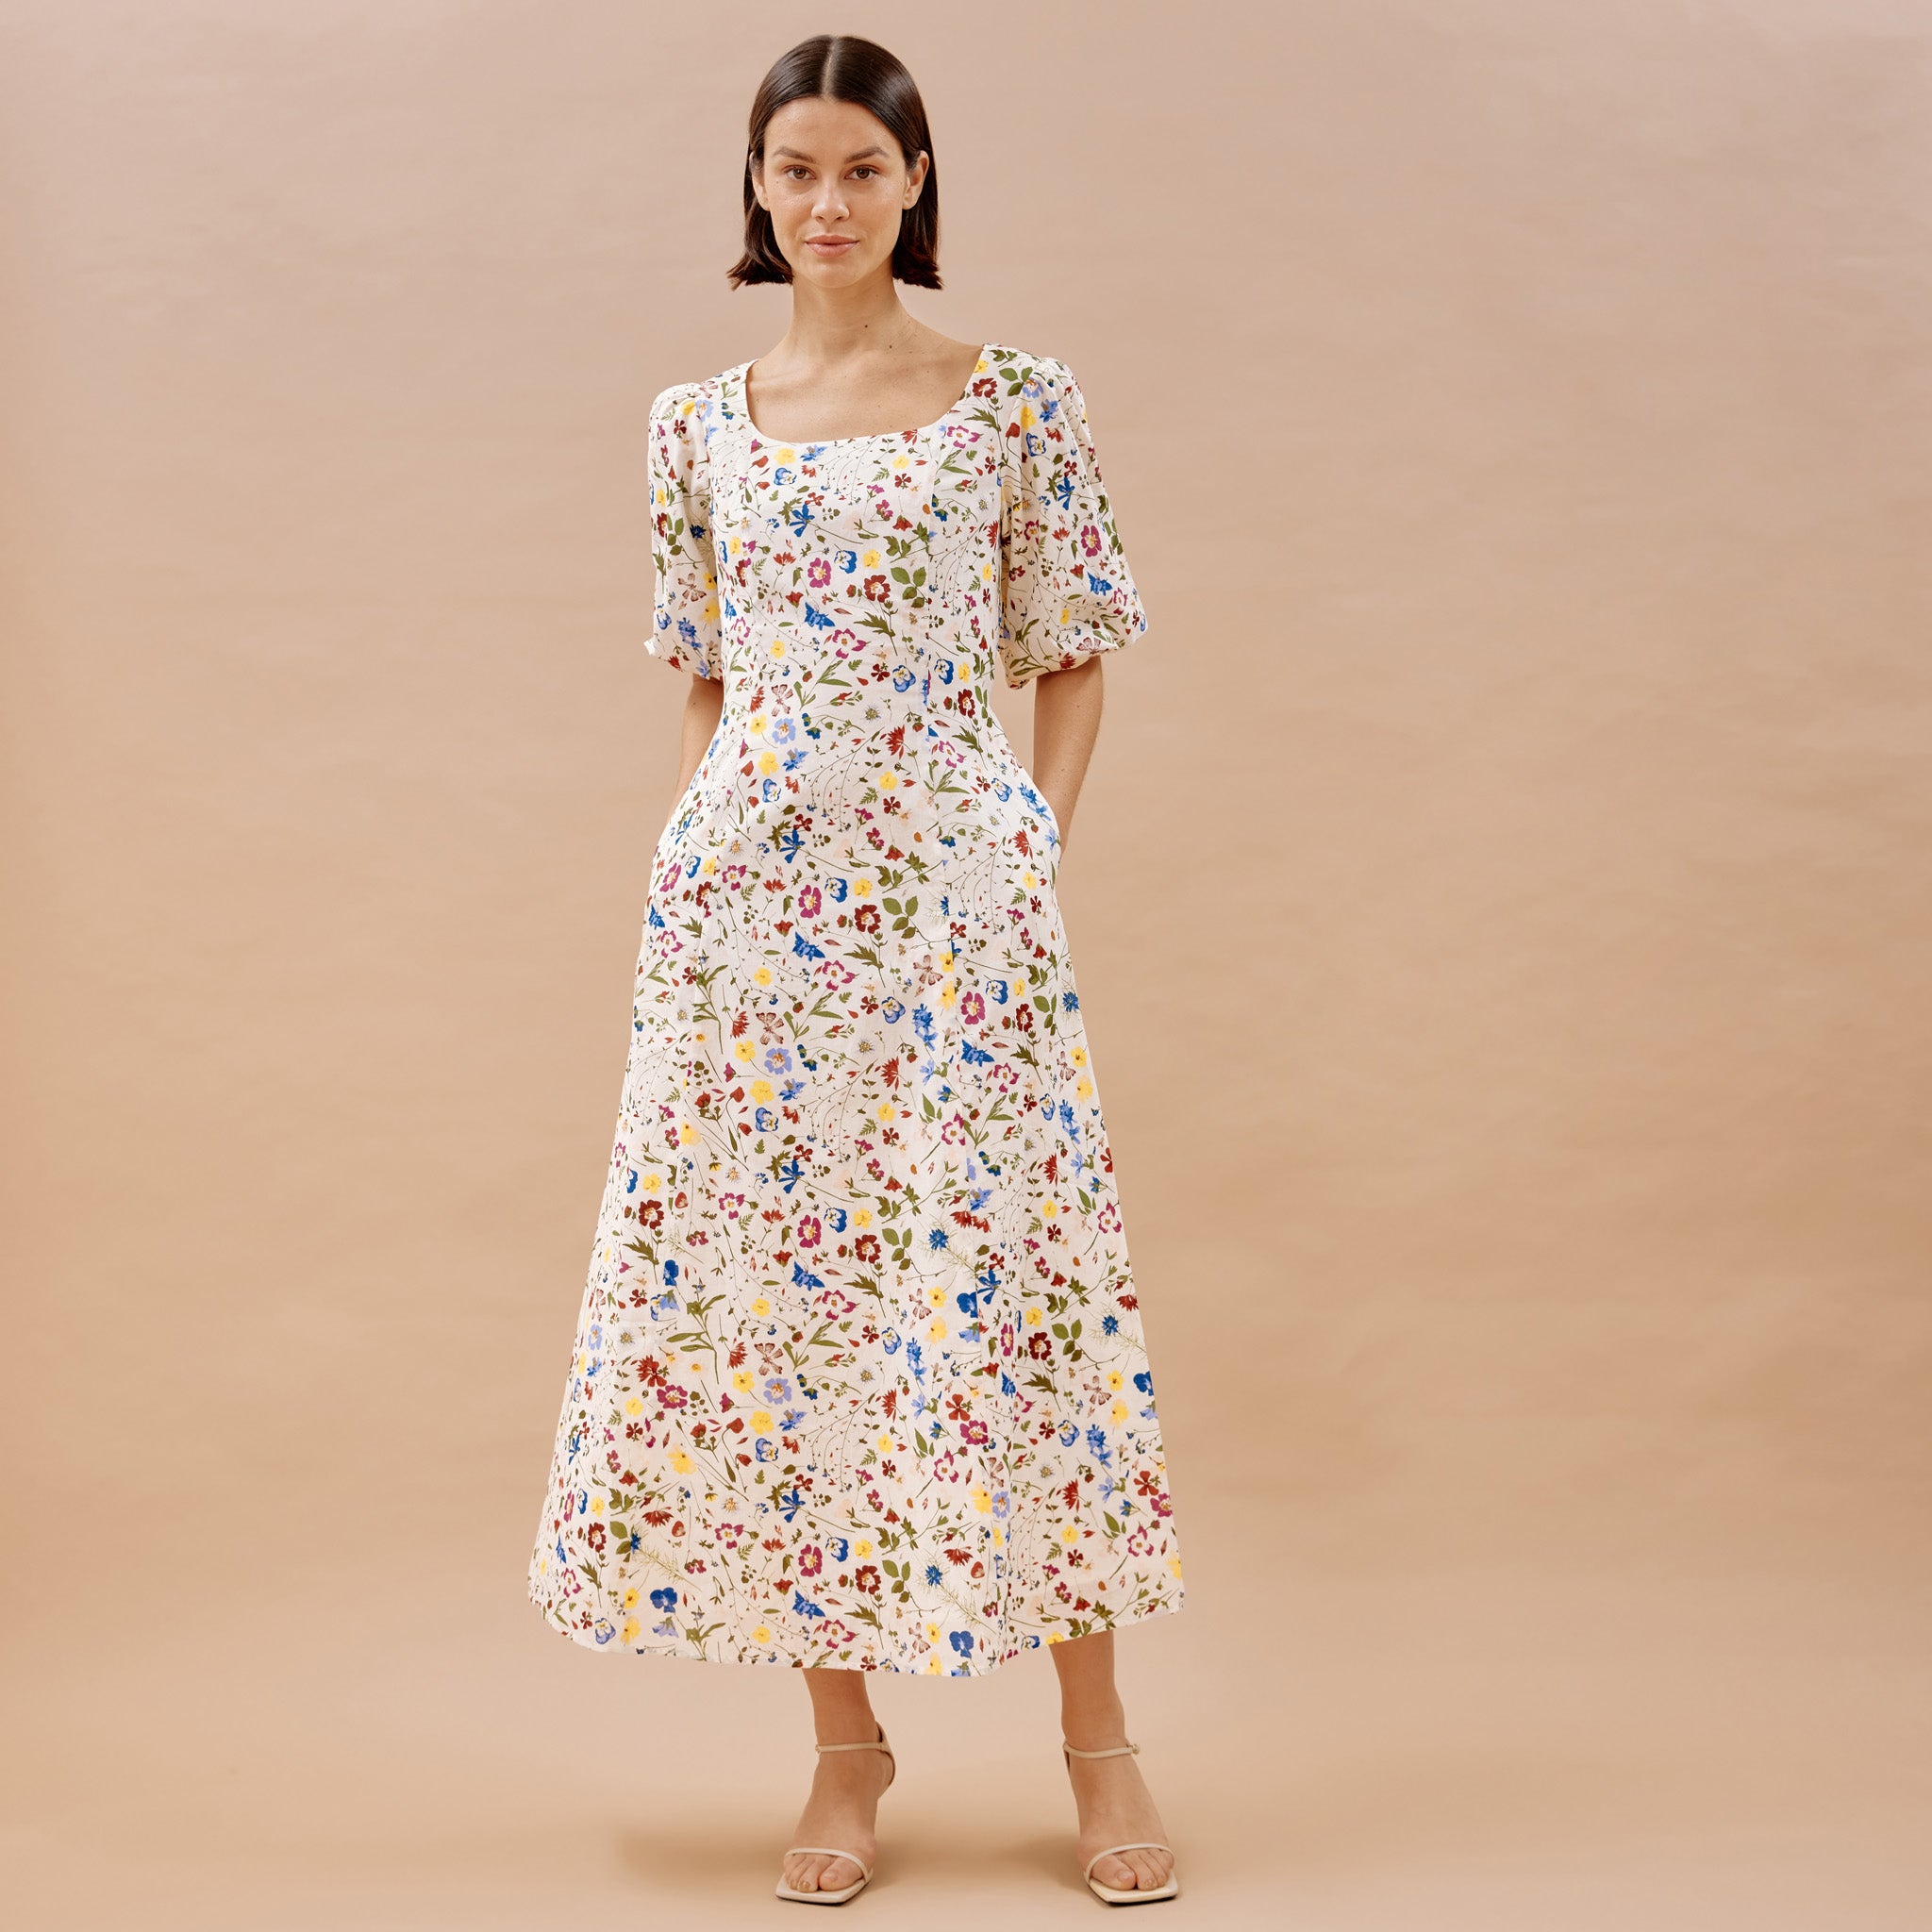 Buttercup Pressed Floral Maxi Dress